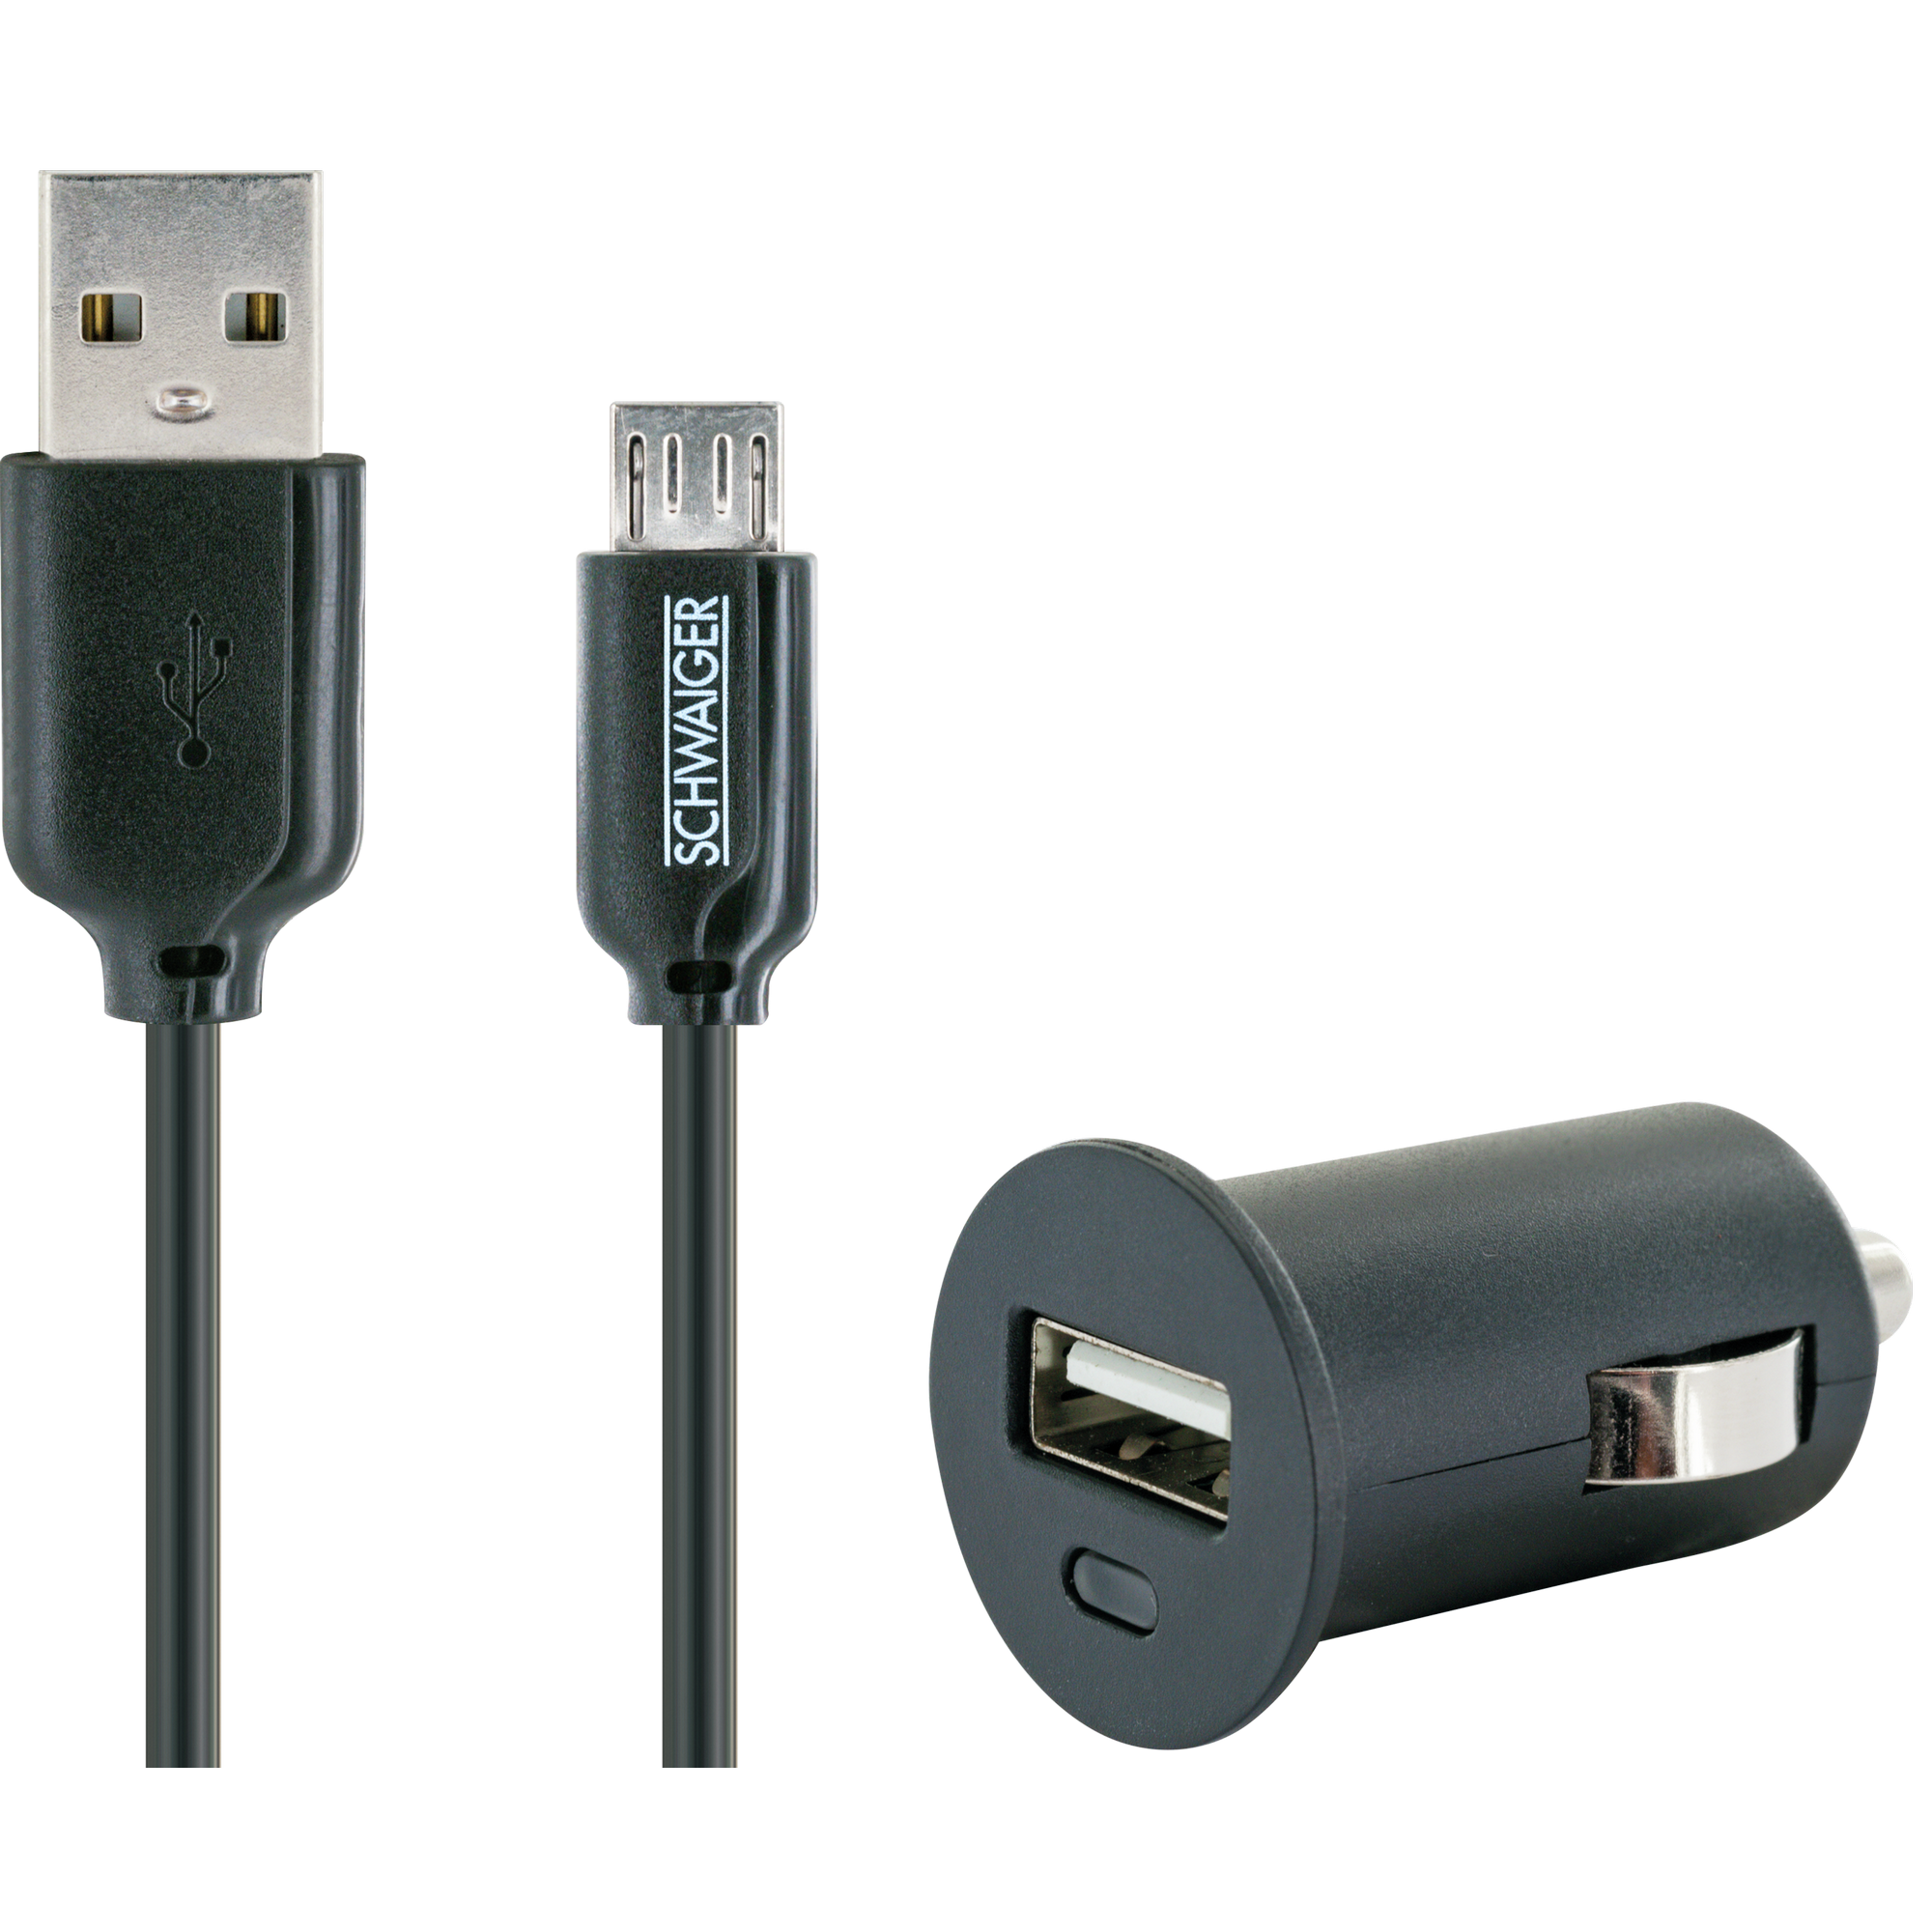 Ladeset Micro USB 'Smart' 12 V, 100 cm + product picture